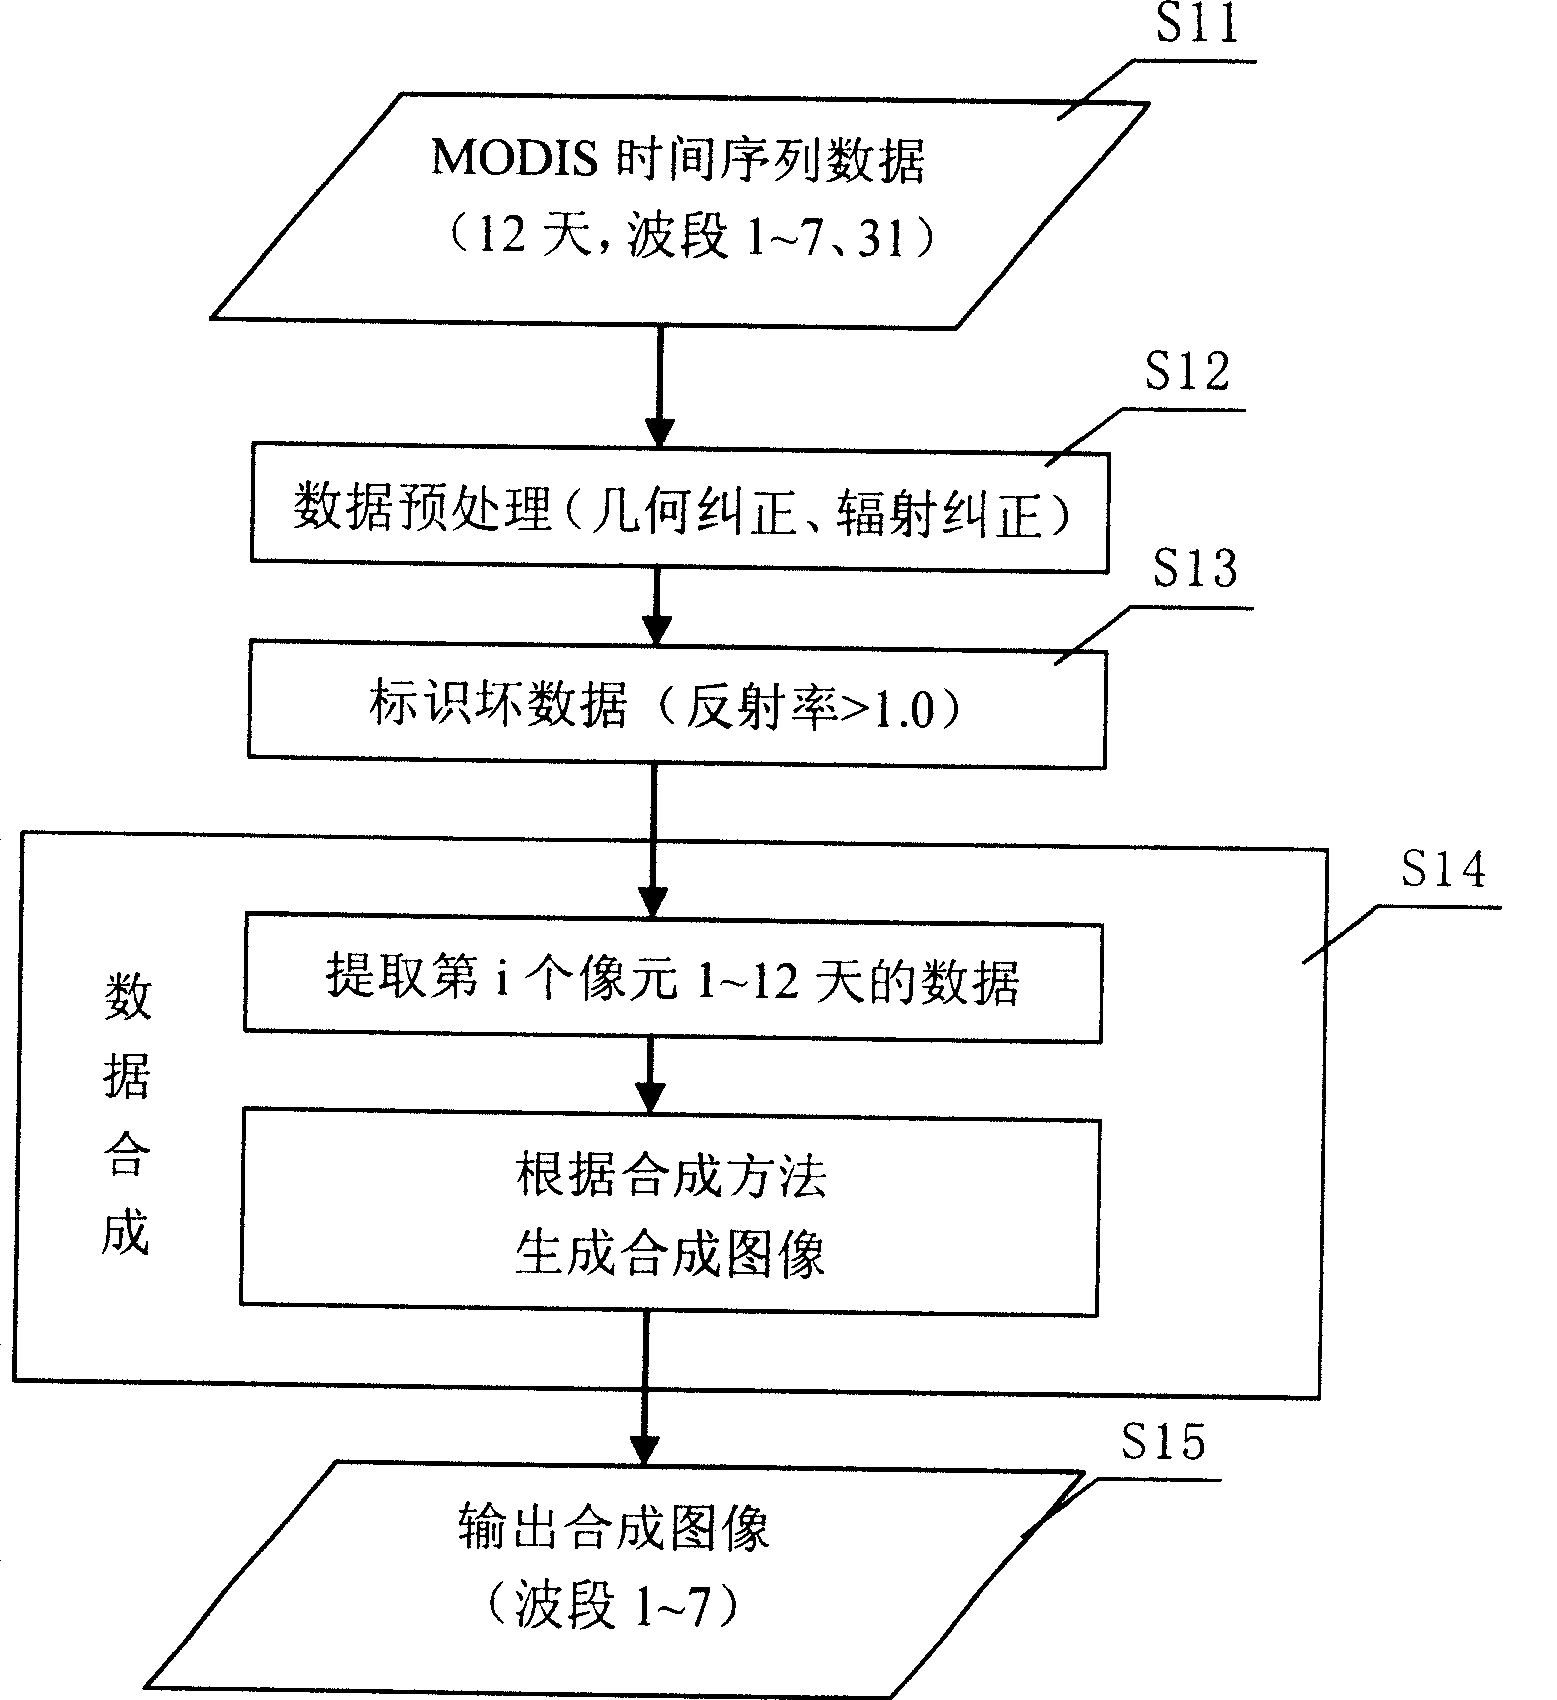 MODIS time sequence data synthesis method for extracting burn scar area and apparatus therefor